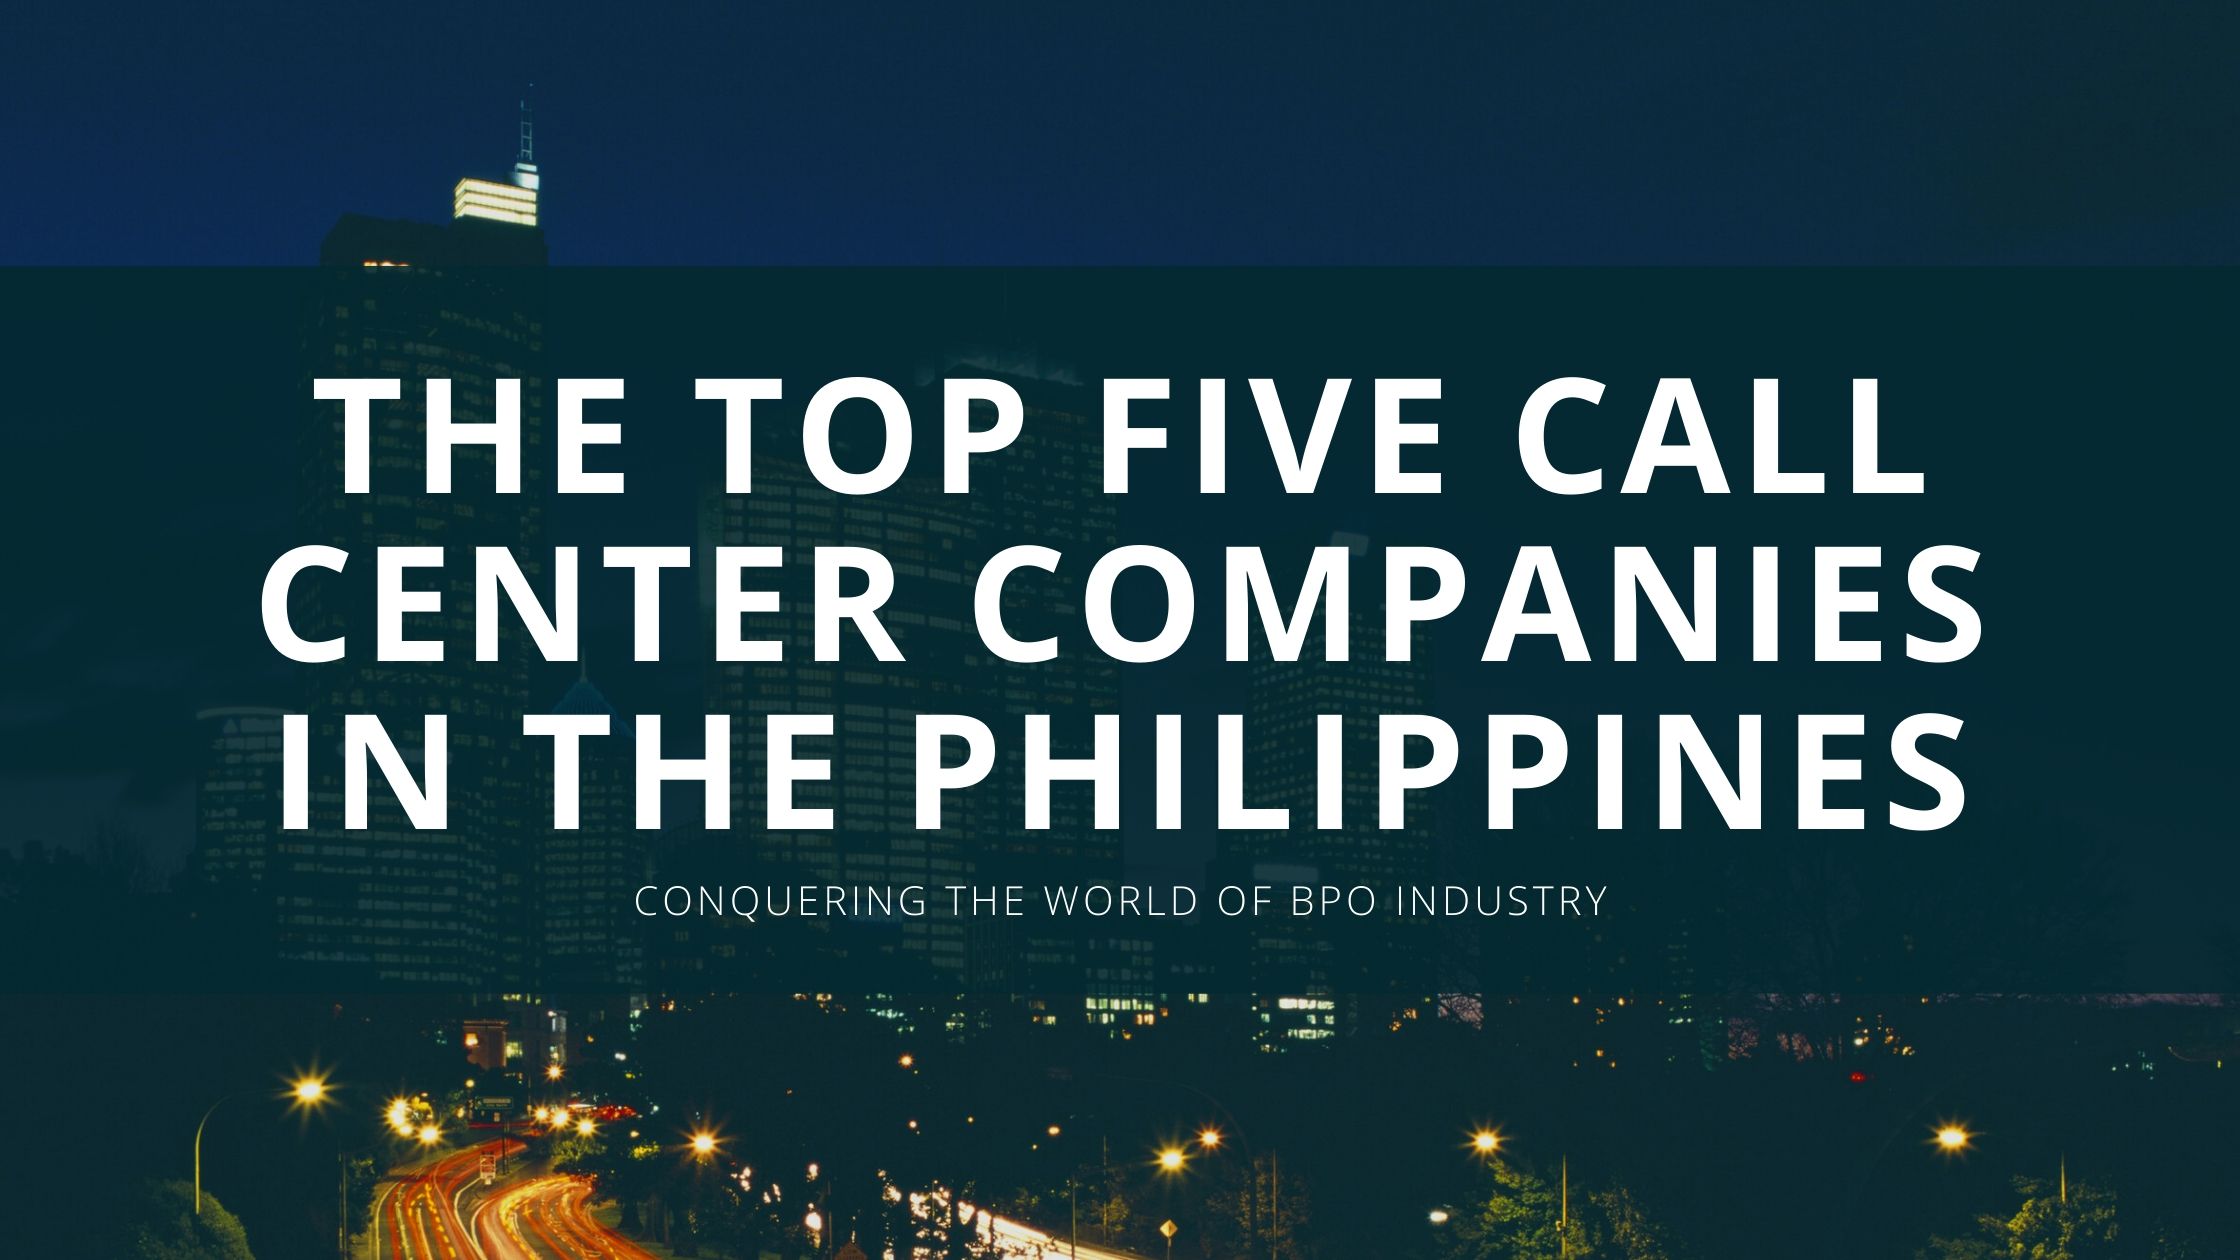 Conquering the World of BPO Industry